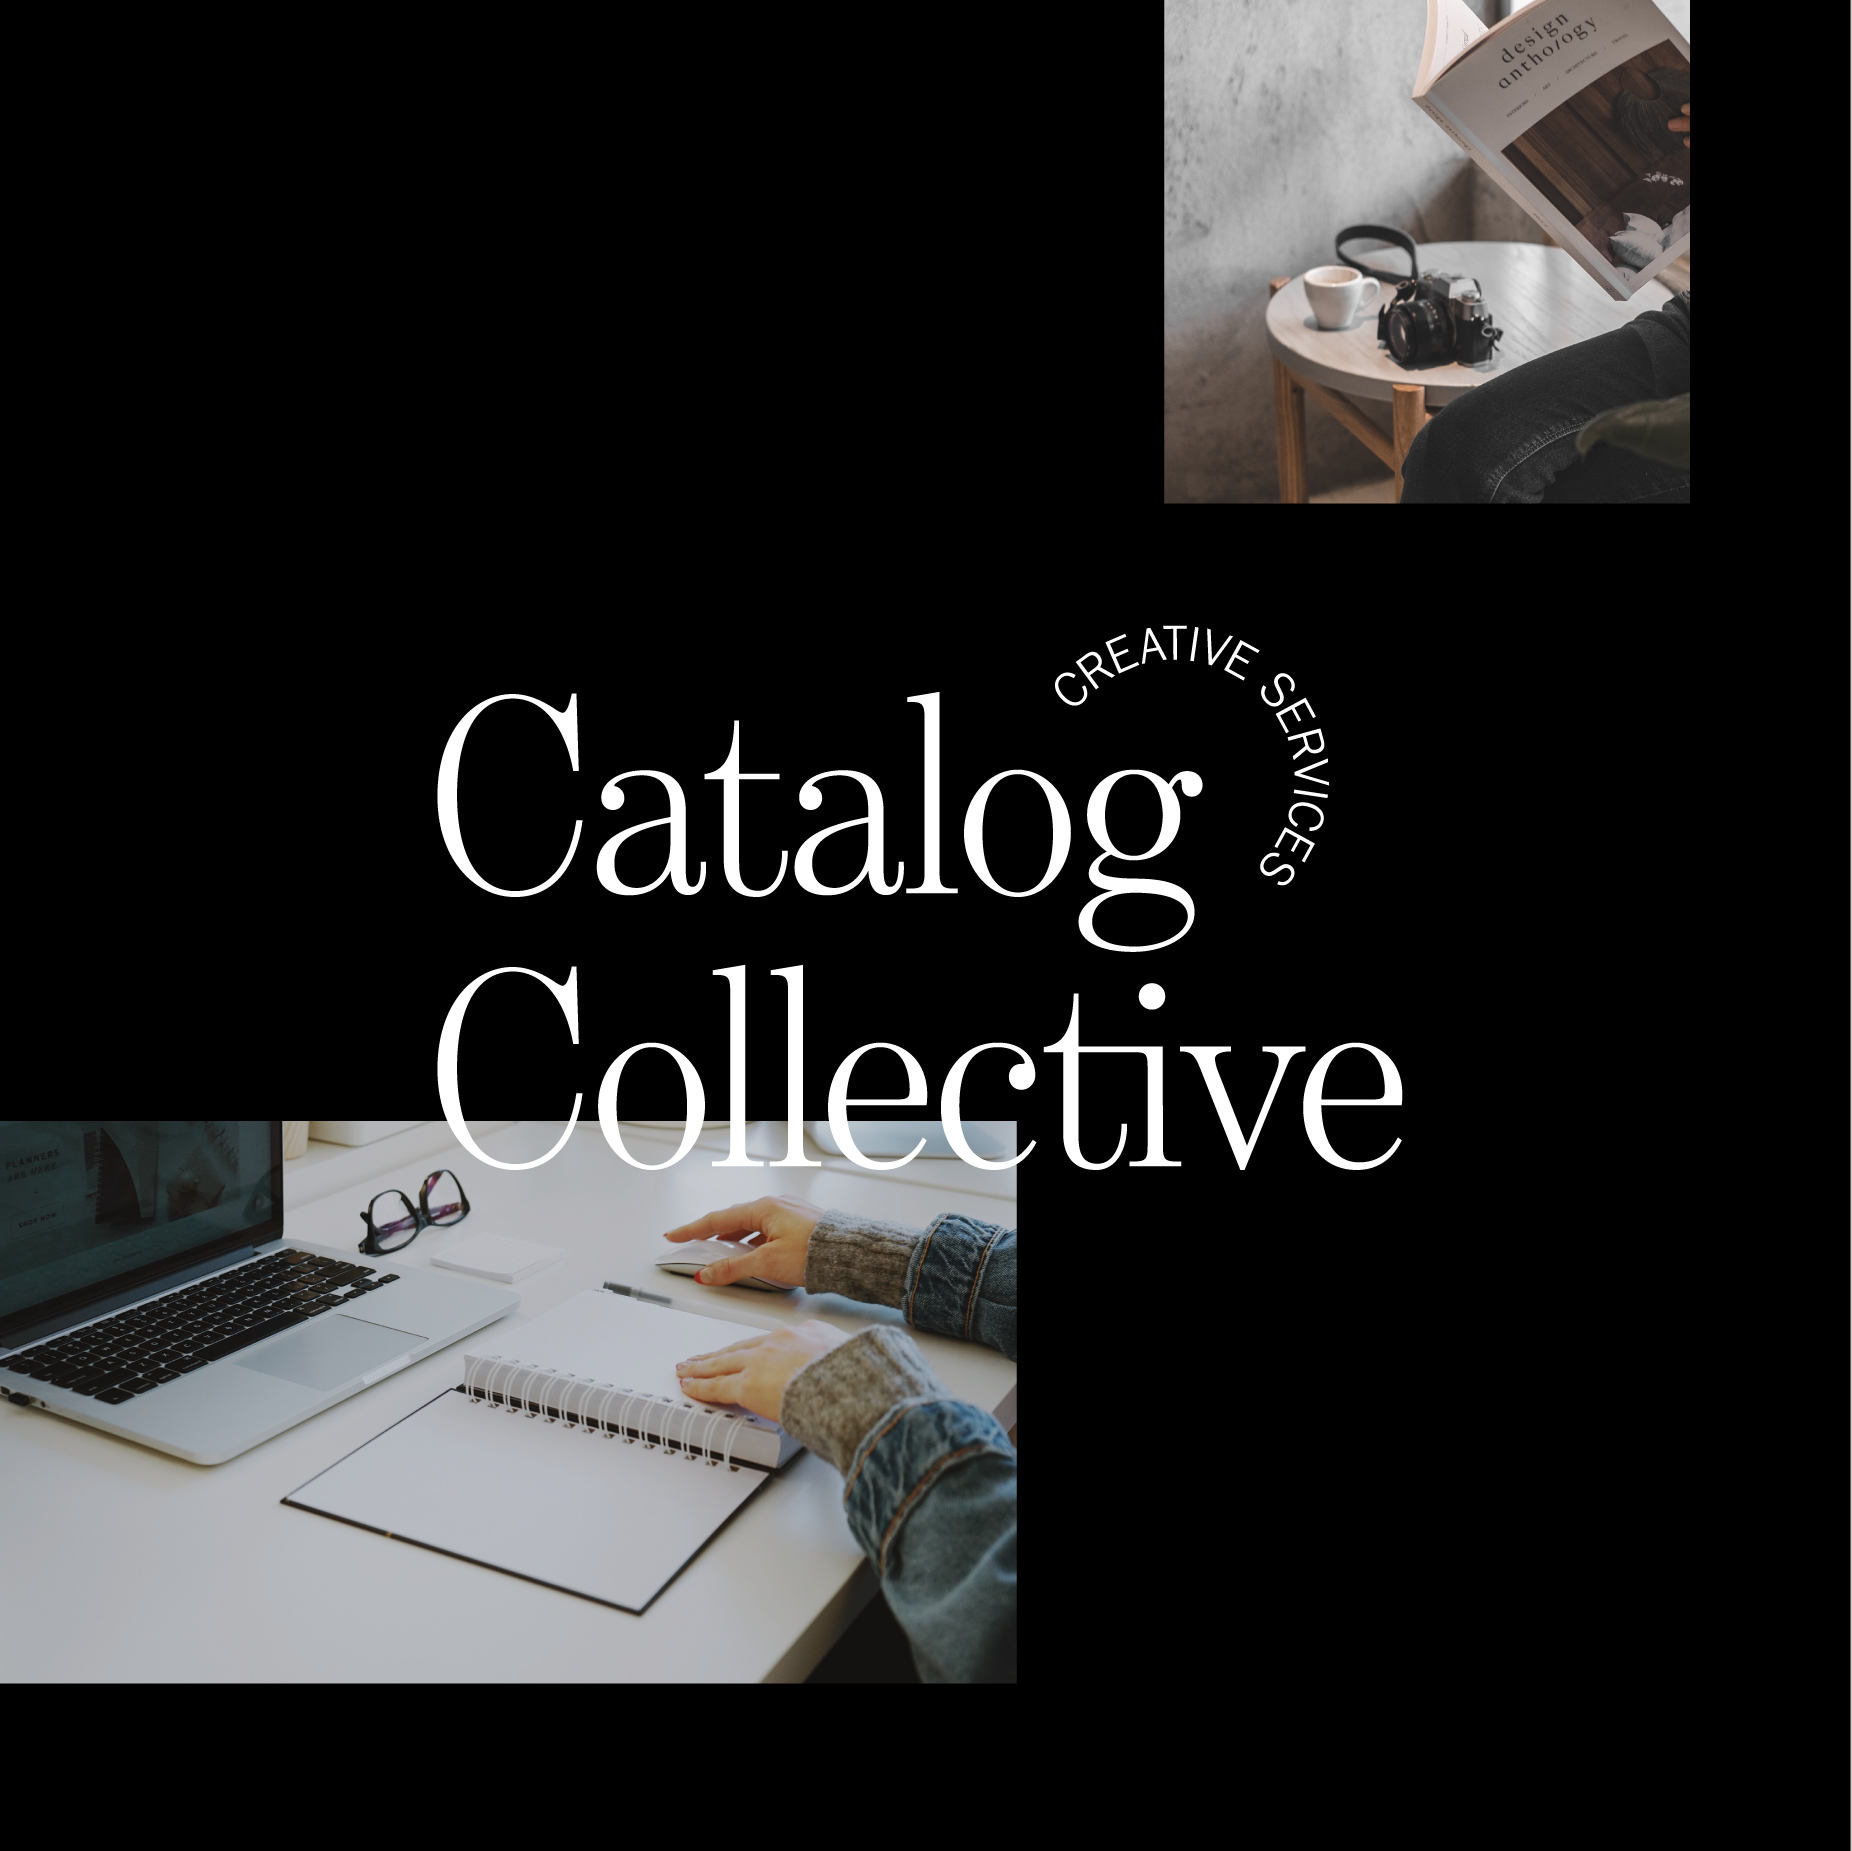 Catalog Collective, Graphic Design Services, Marketing Services, Photography Services